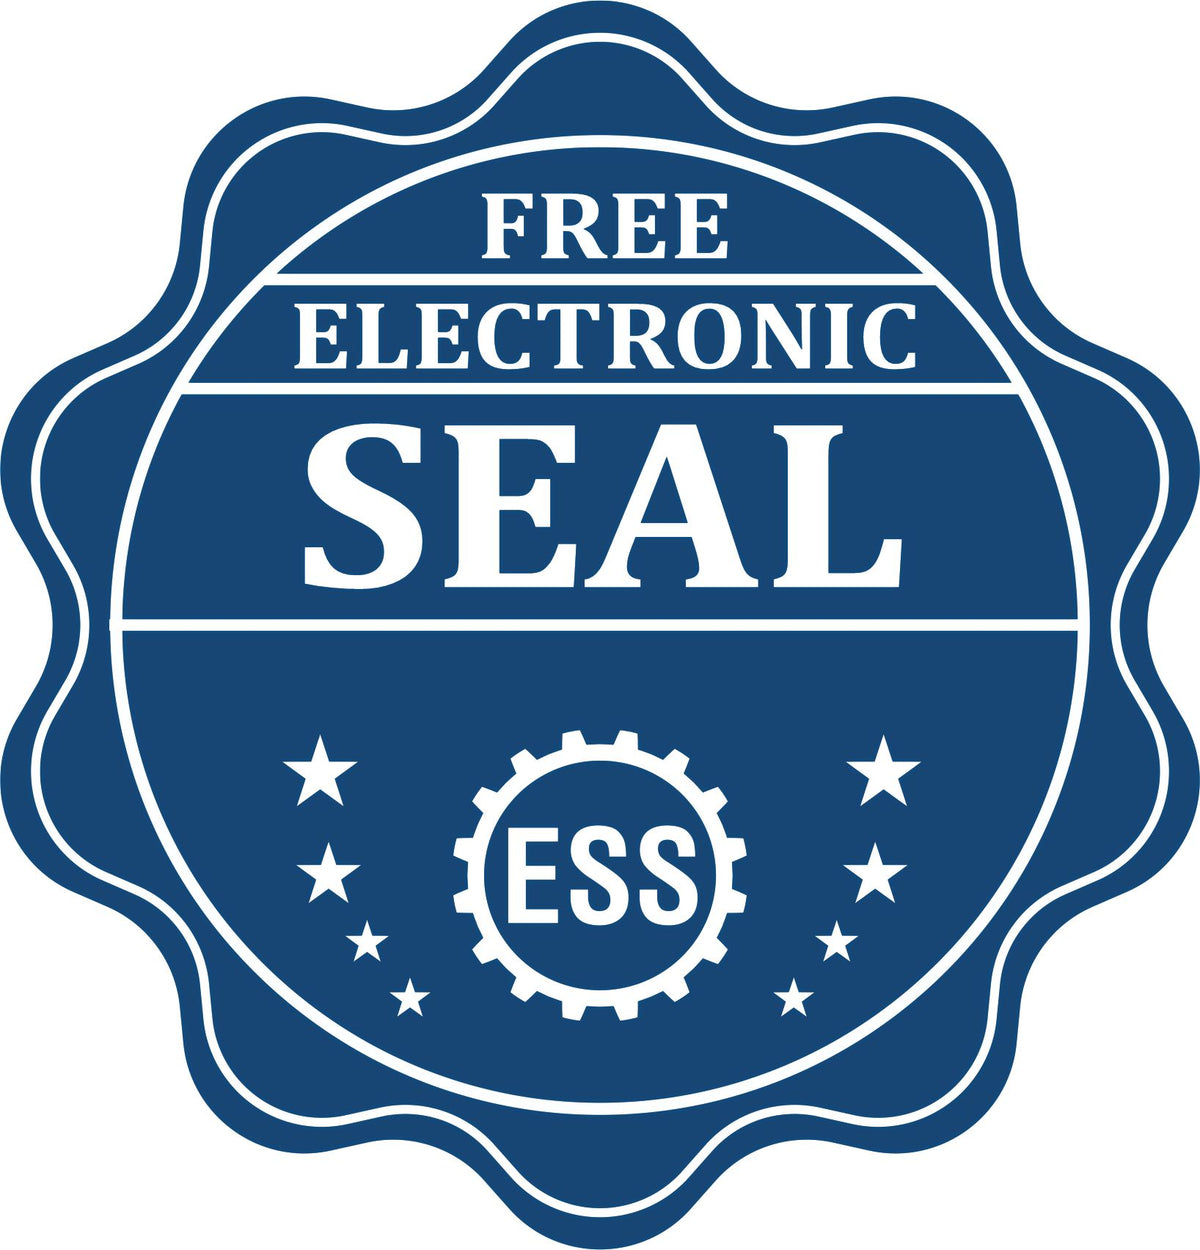 A badge showing a free electronic seal for the State of Maine Extended Long Reach Geologist Seal with stars and the ESS gear on the emblem.